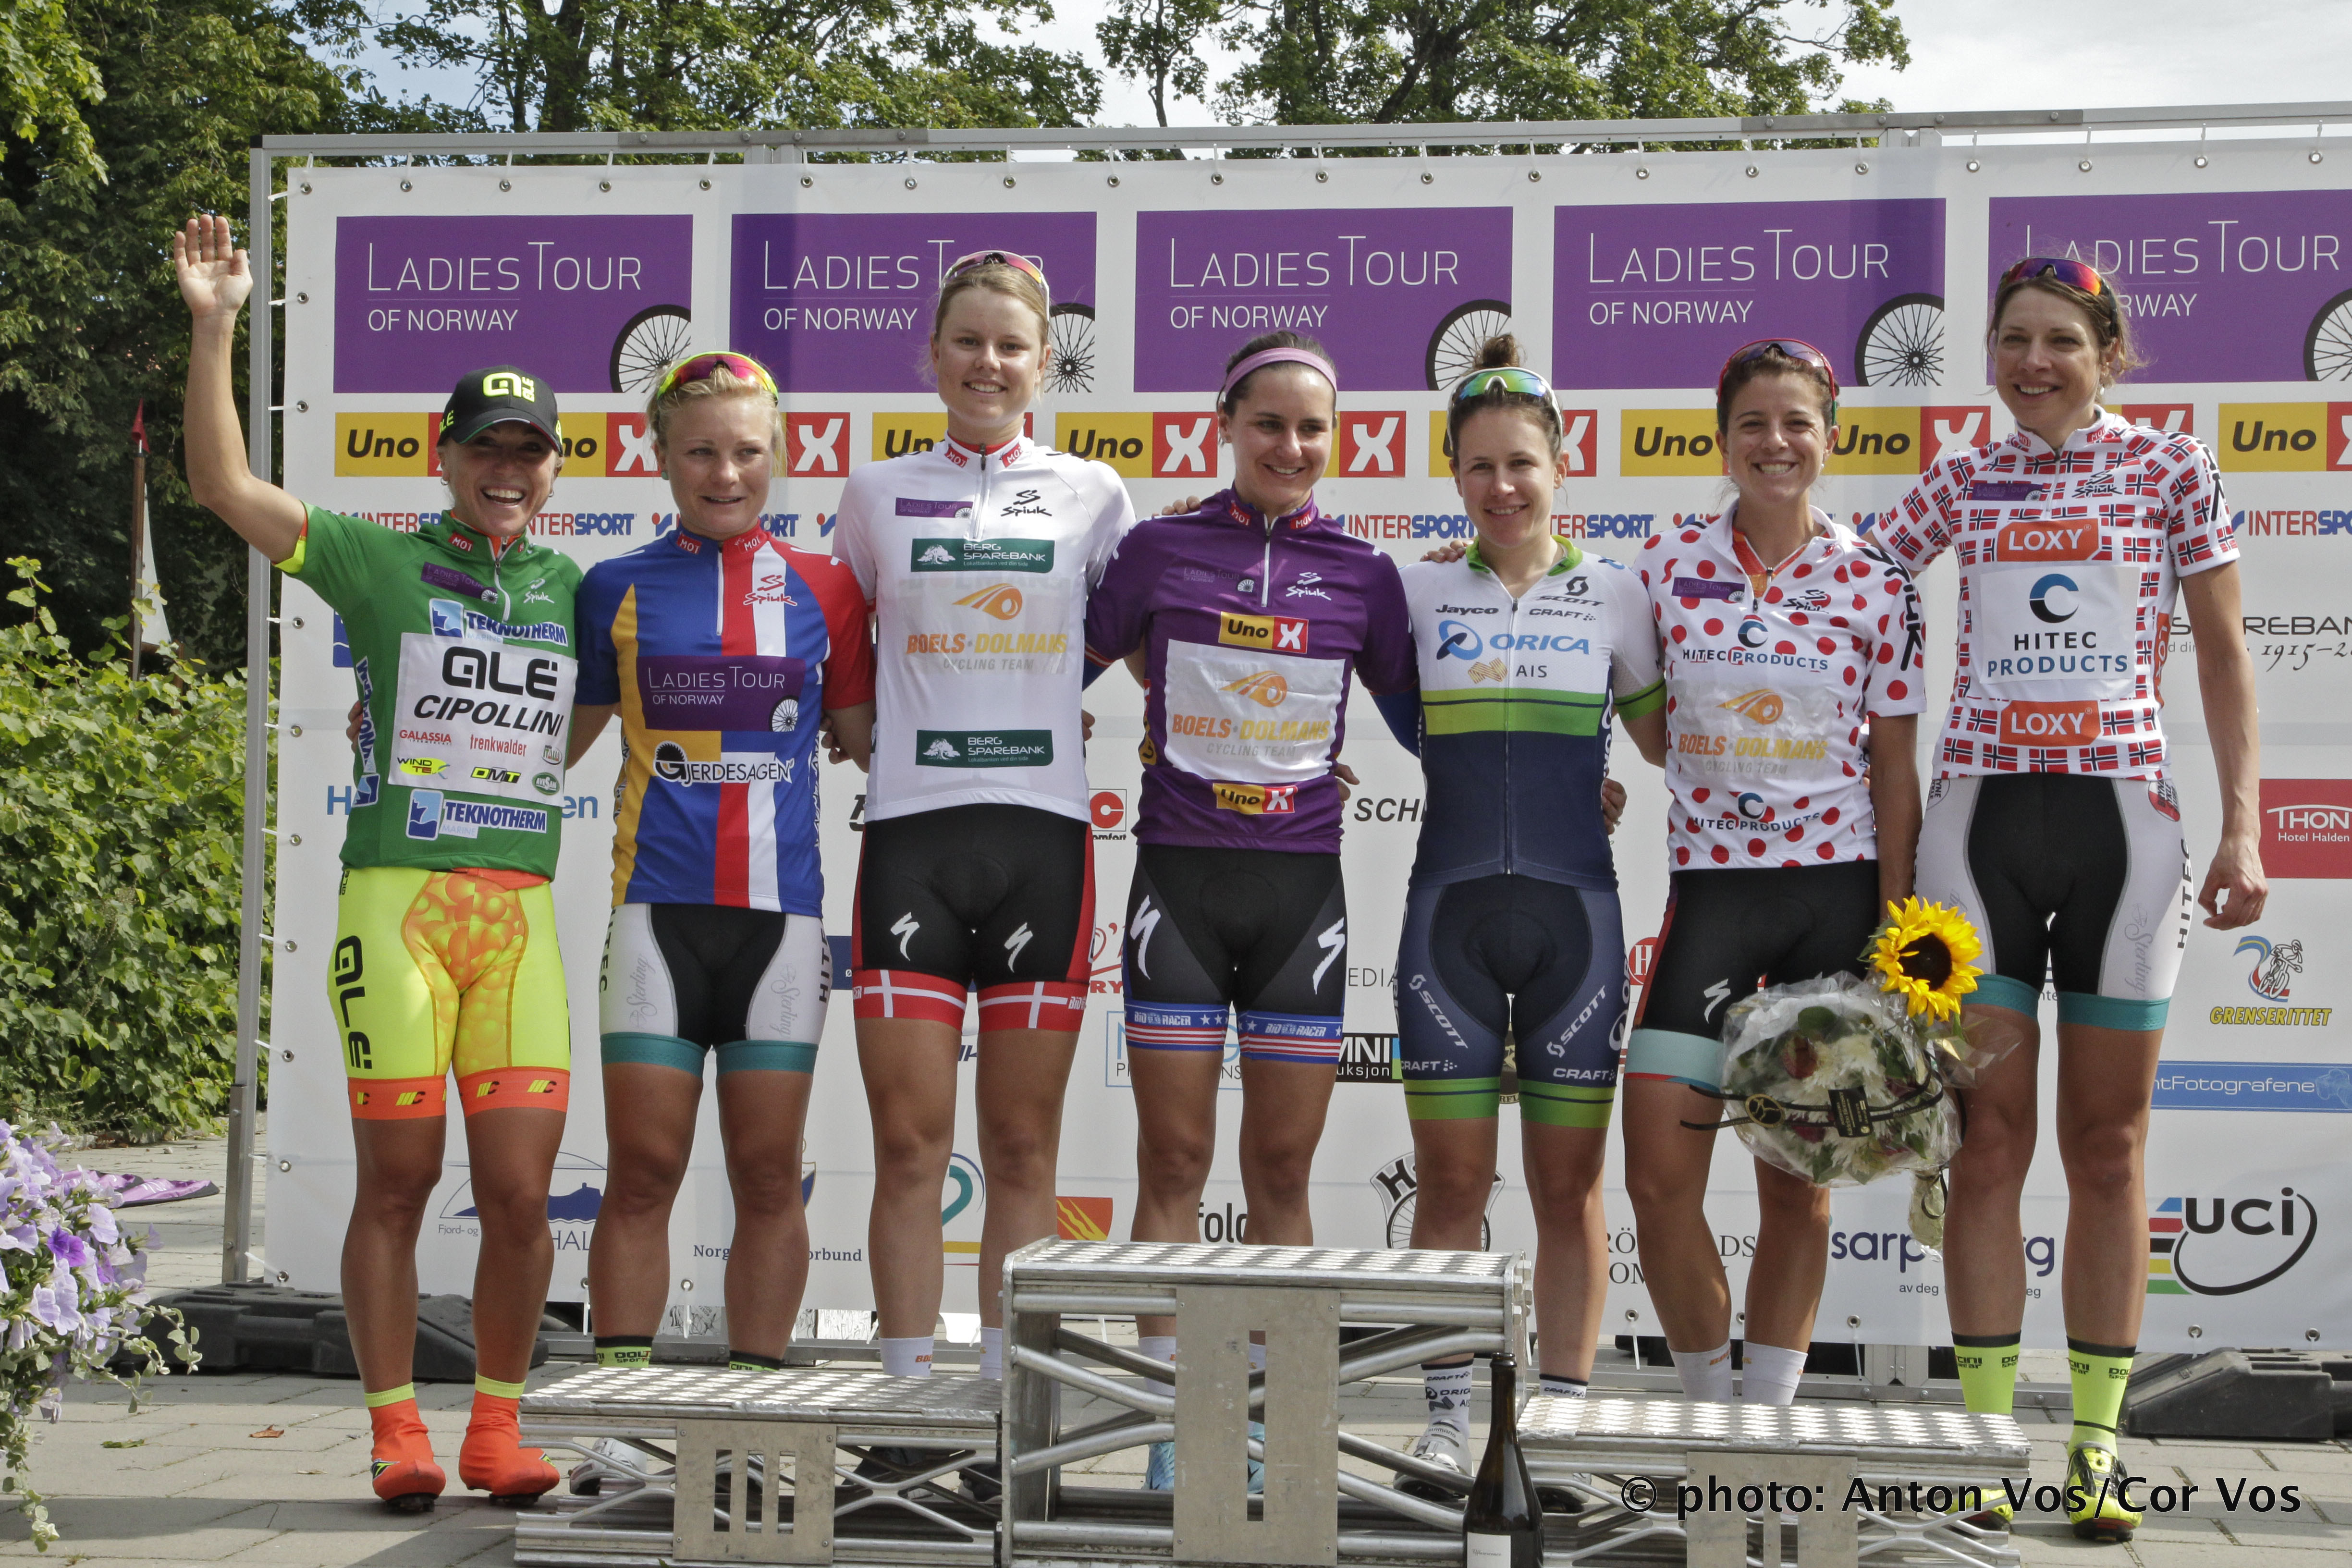 Halden - Norway - wielrennen - cycling - radsport - cyclisme -  Guarnier Megan of Boels Dolmans Cycling Team - Olds Shelley of Ale Cipollini (ITA) Moberg Emilie of Hitec Products - Dideriksen Amalie of Boels Dolmans Cycling Team - Spratt Amanda of Orica AIS Stevens Evelyn of Boels Dolmans Cycling Team - Heine Vita of Hitec Products pictured during  stage - 2 of the Ladiestour of Norway 2015 - photo Anton Vos/Cor Vos © 2015